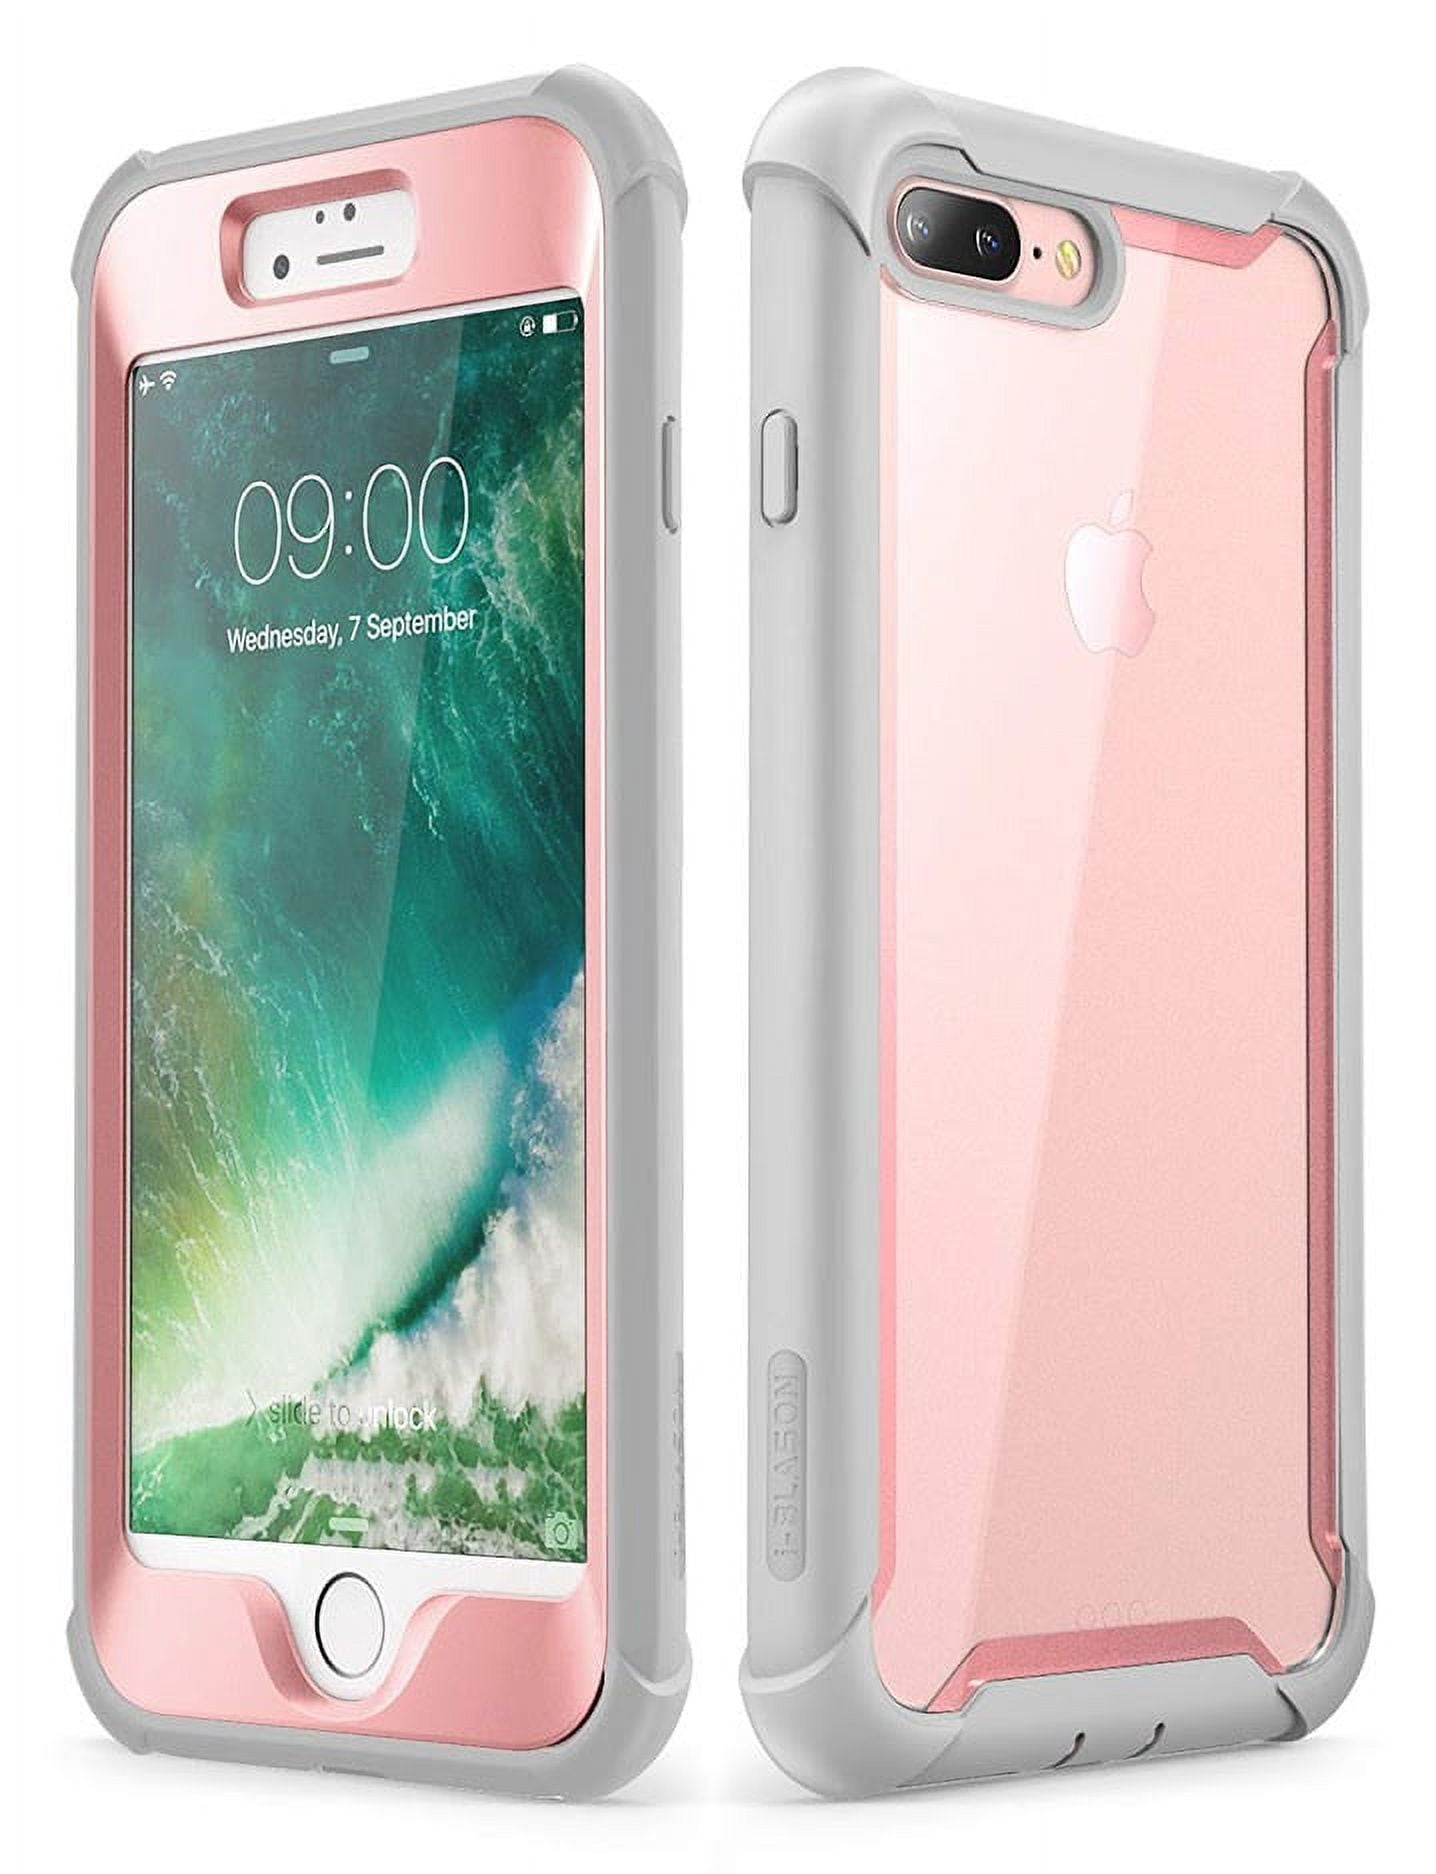 iPhone 8 Plus case, iPhone 7 Plus case, i-Blason [Ares] Full-Body Rugged  Clear Bumper Case with Built-in Screen Protector for Apple iPhone 8